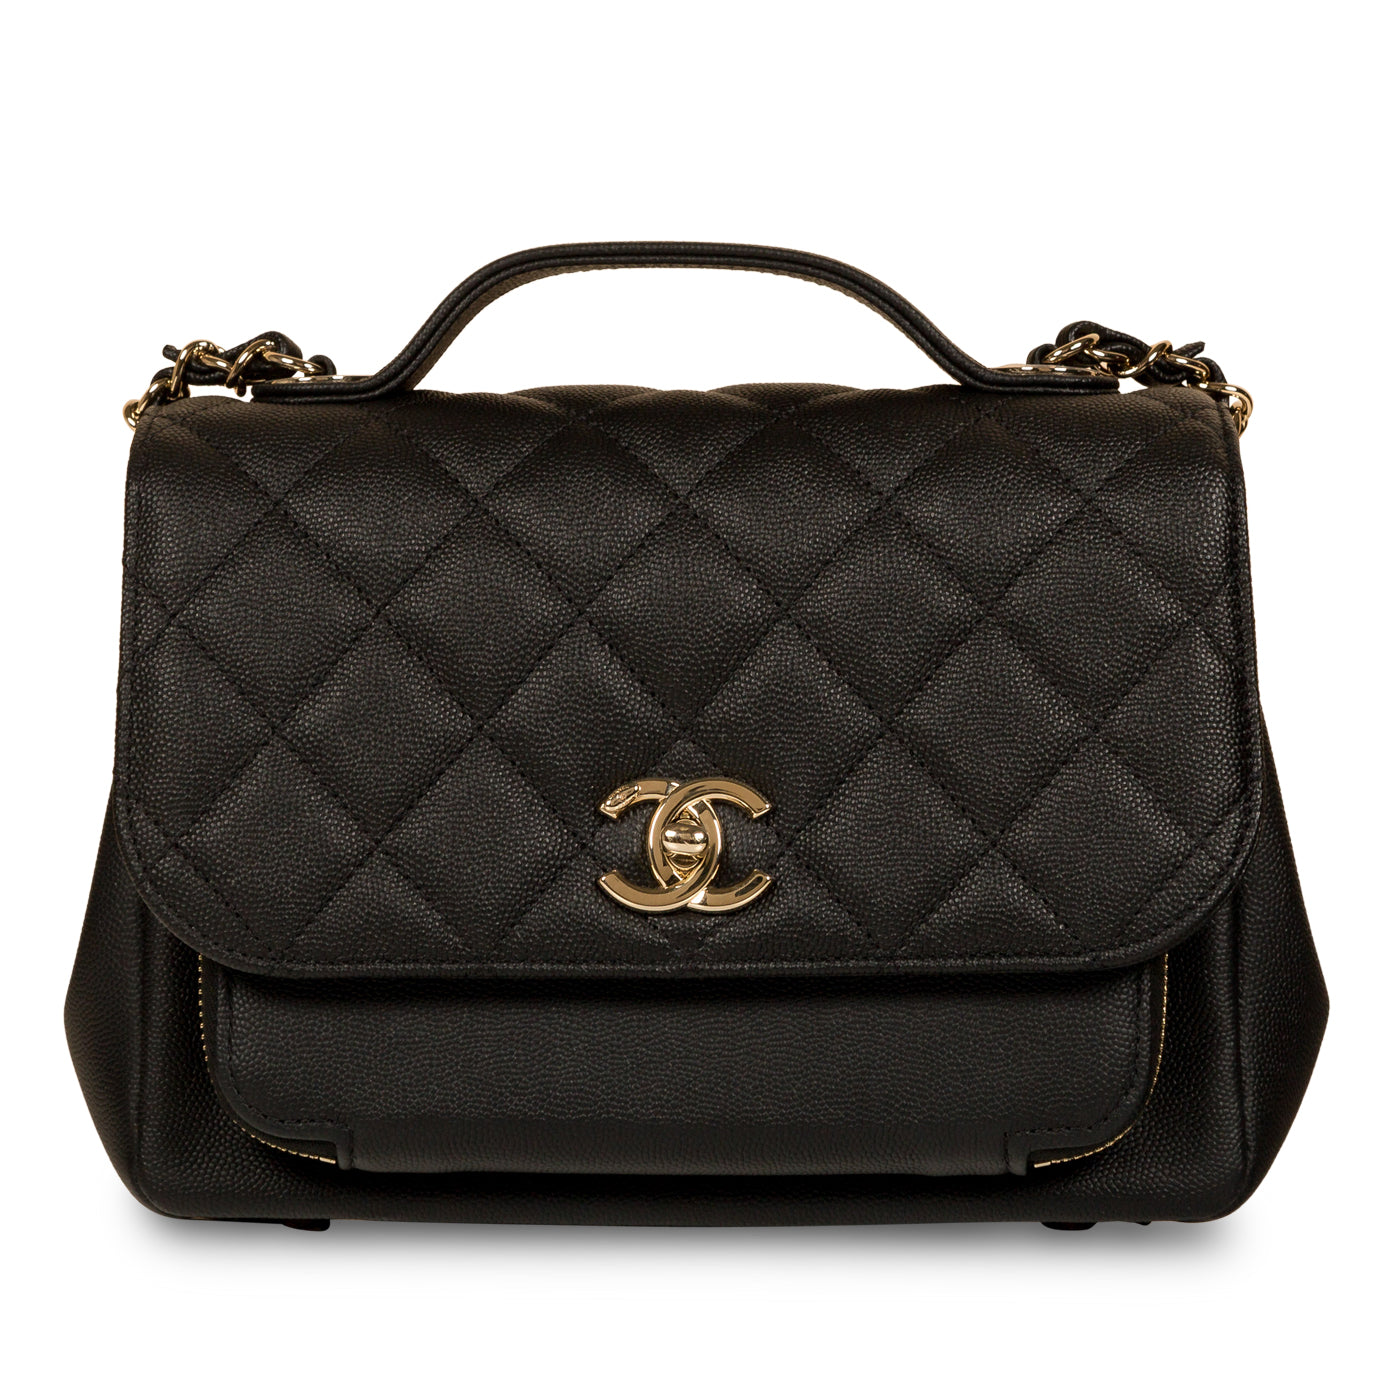 CHANEL - Small Business Affinity Flap Bag - Black - Immaculate | Bagista